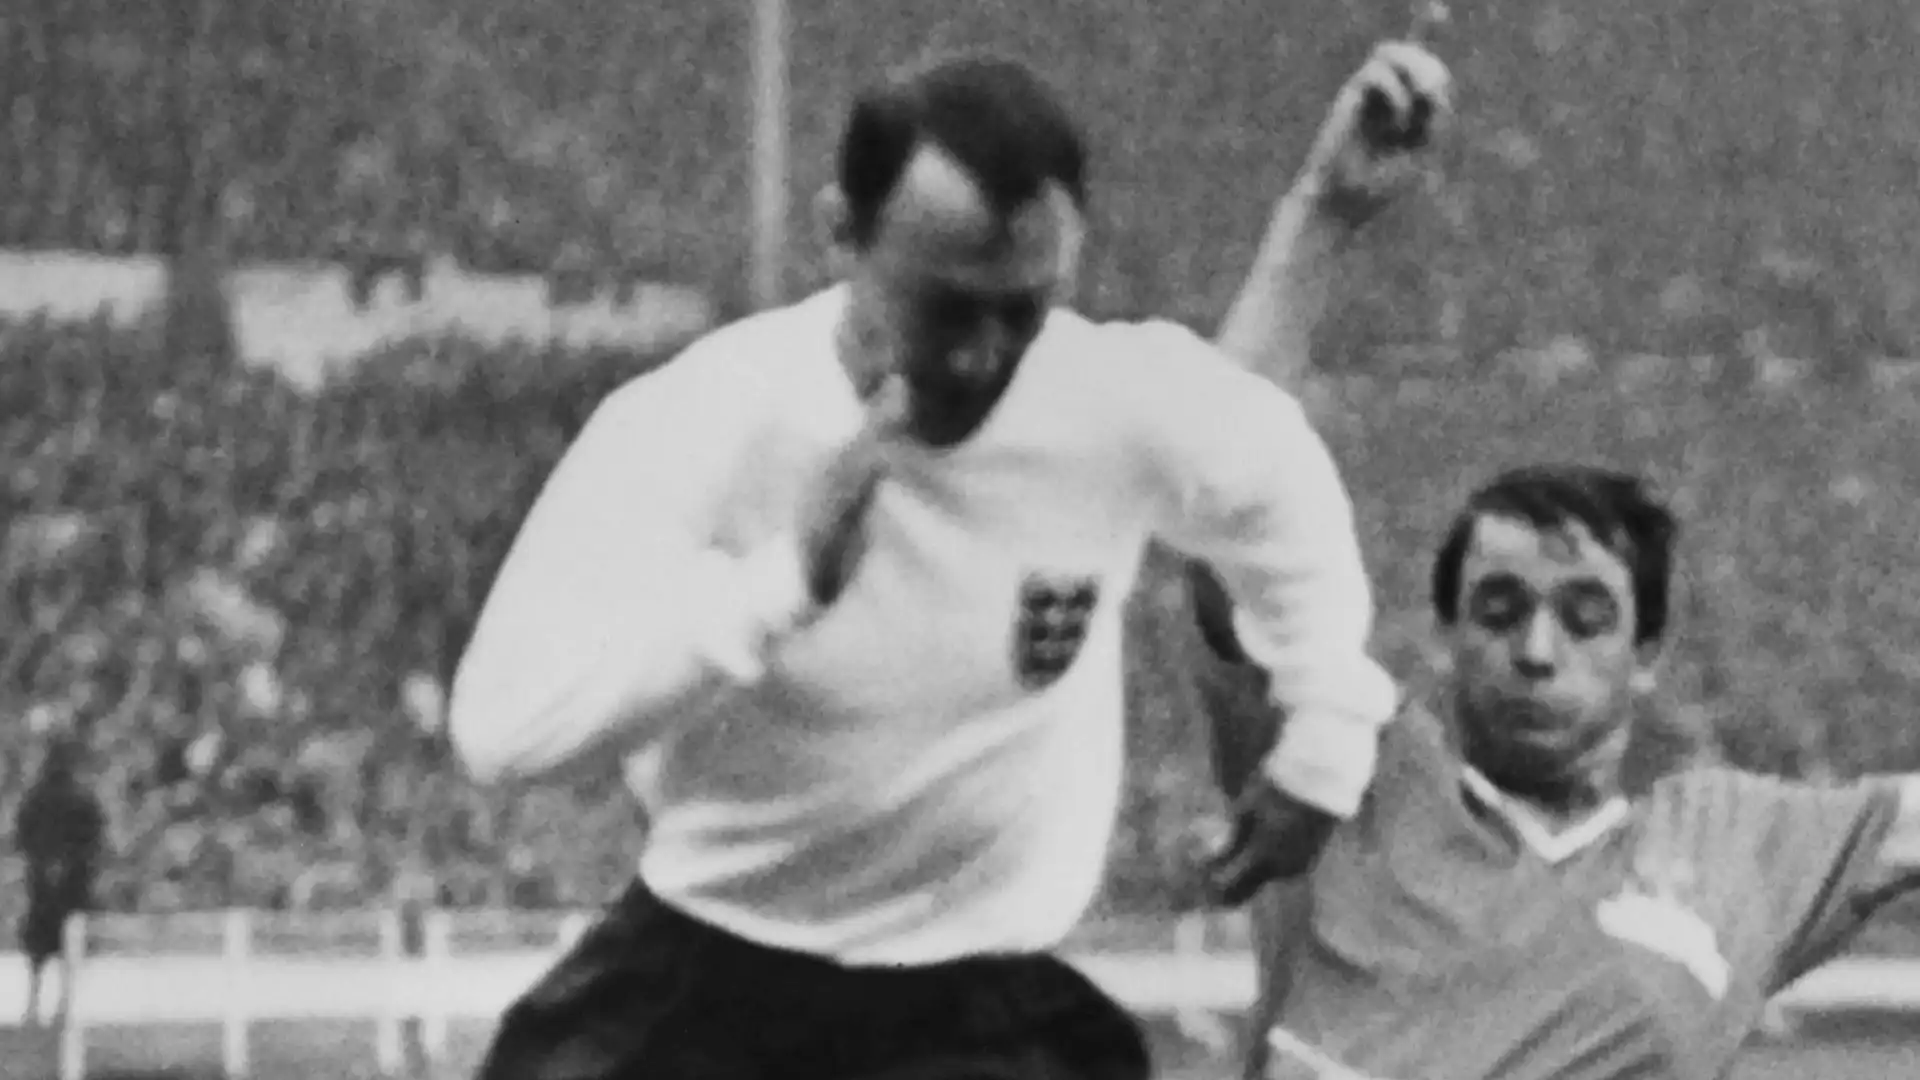 4- Jimmy Greaves